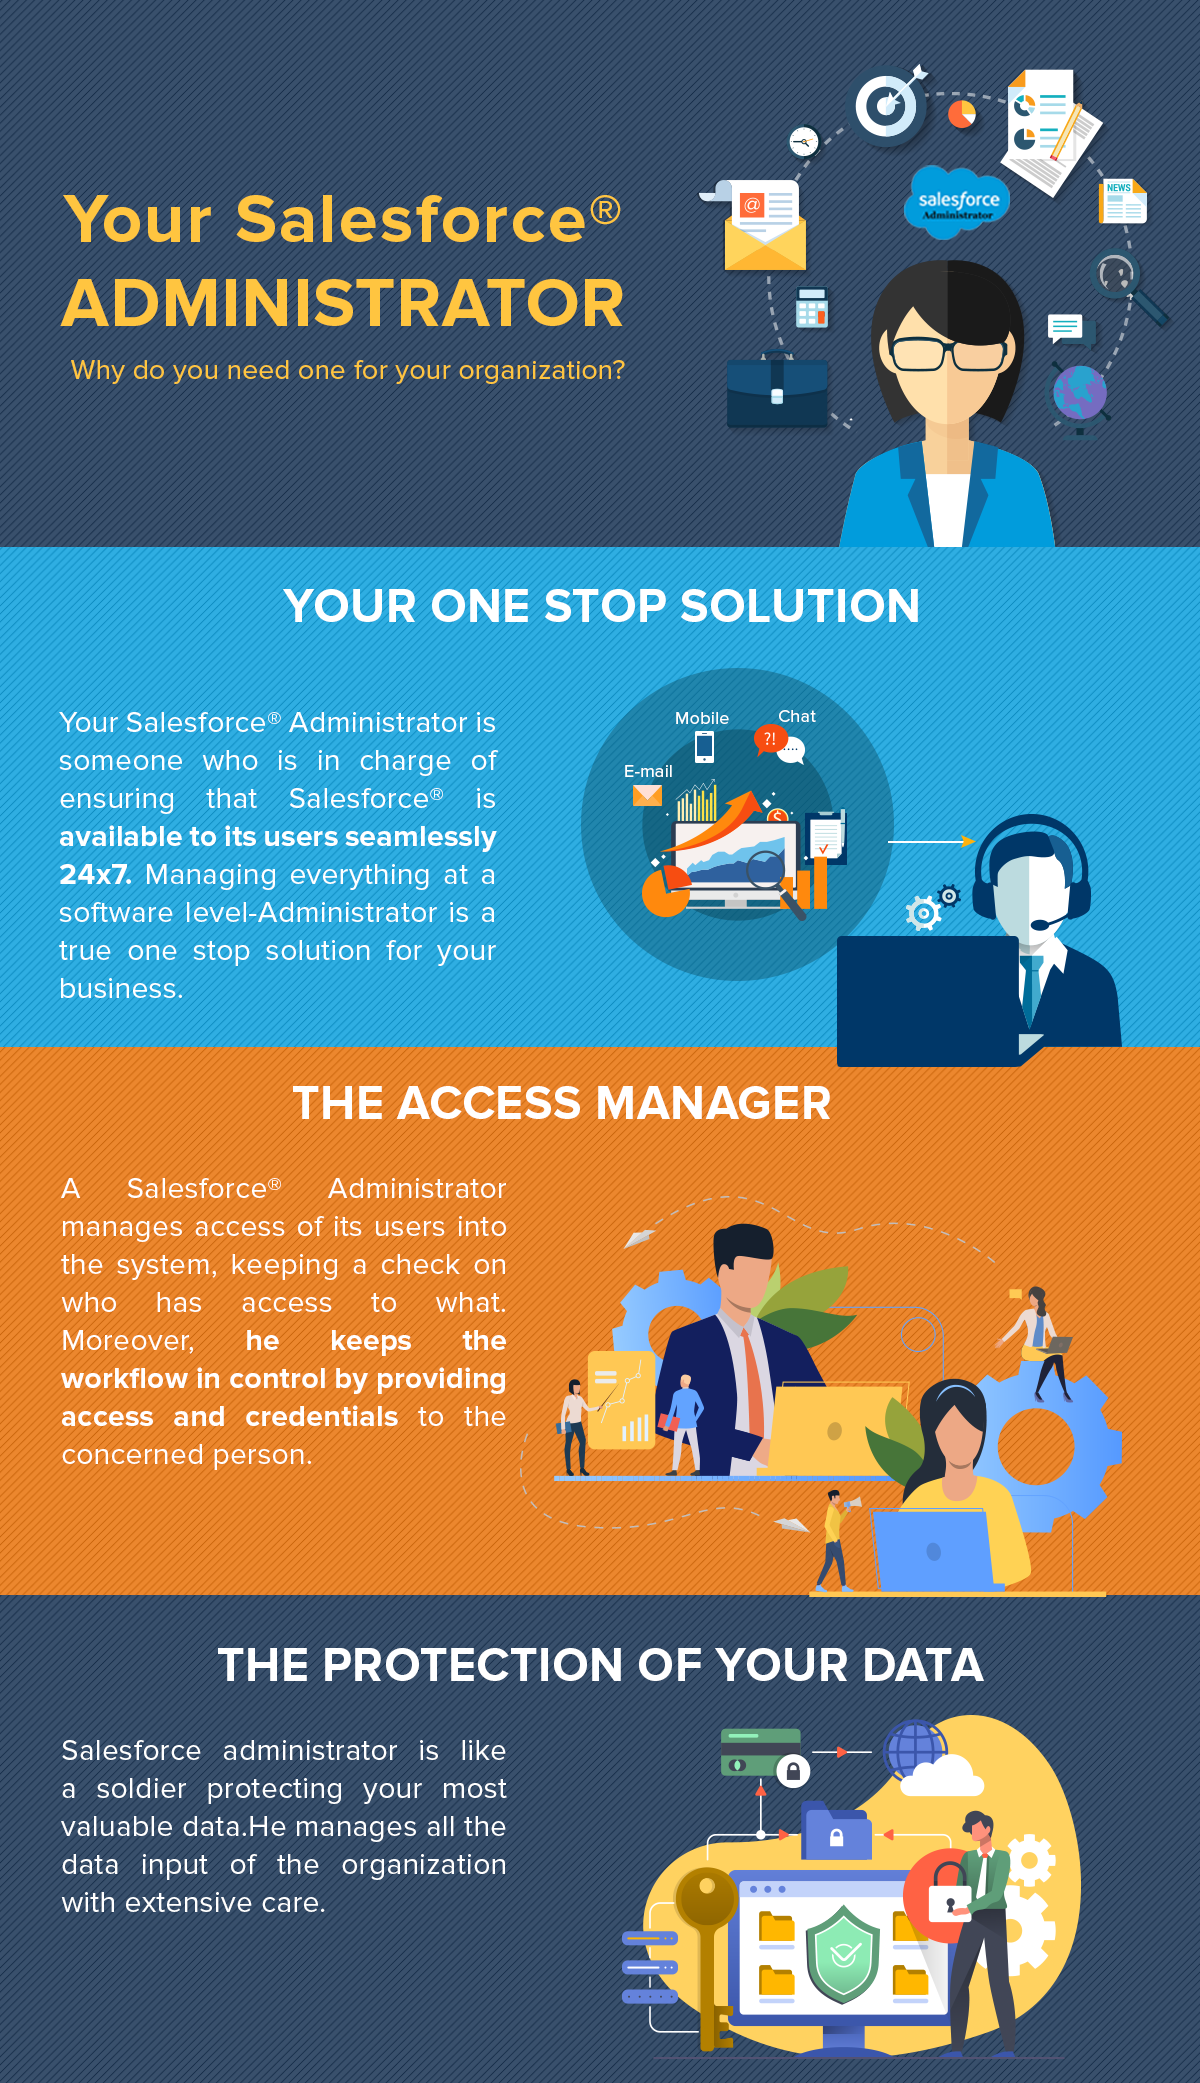 Your Salesforce® Administrator